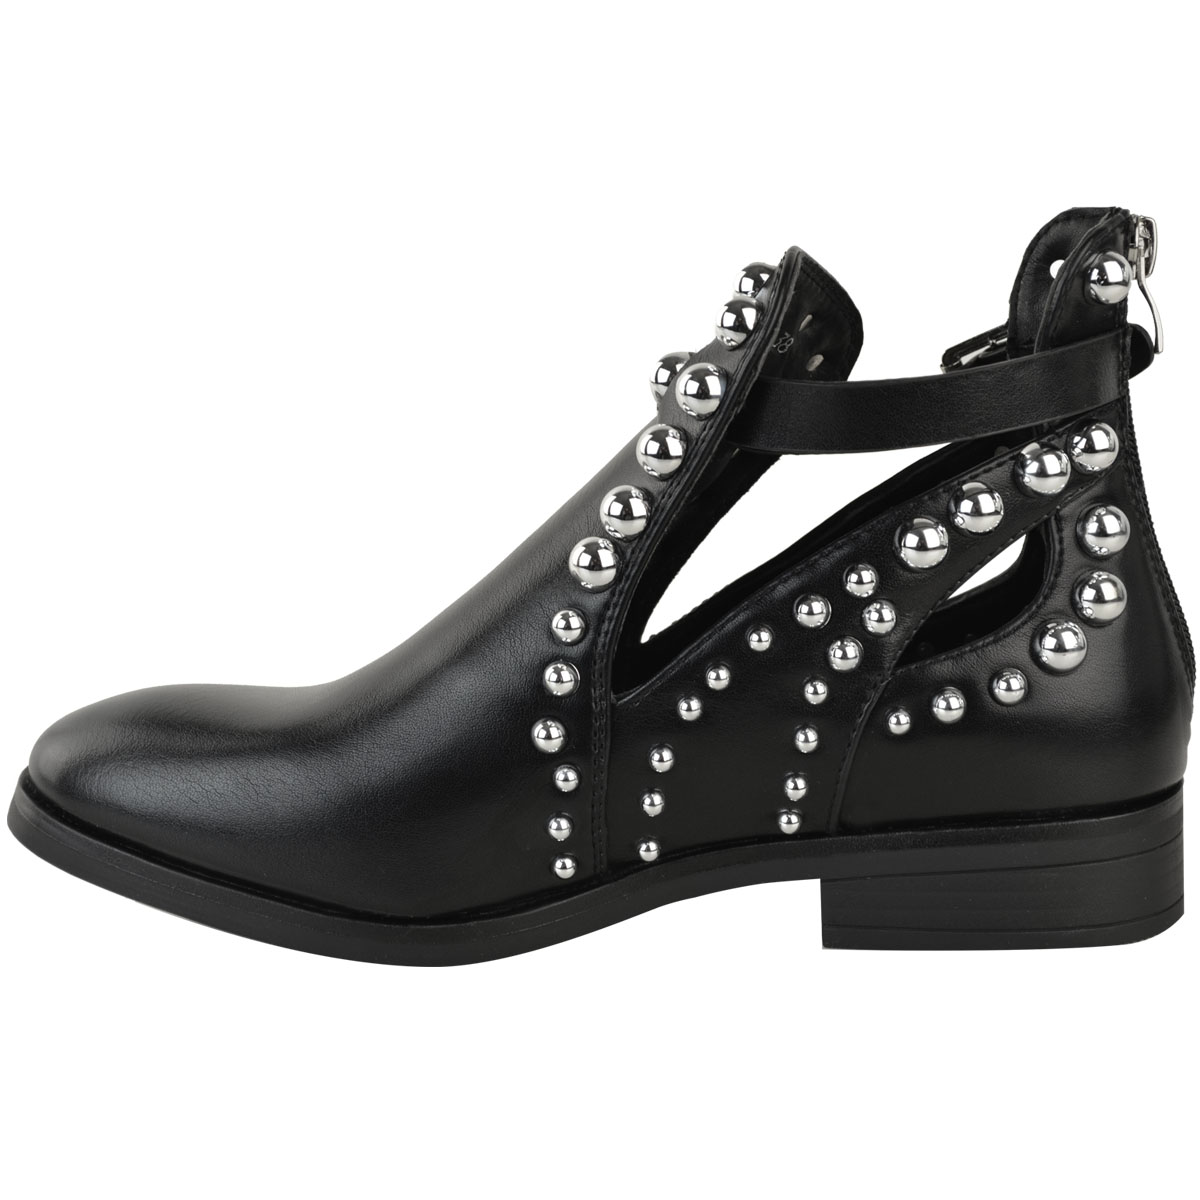 Womens Black Flat Chelsea Ankle Boots Studded Embellished Cut Out Shoes ...